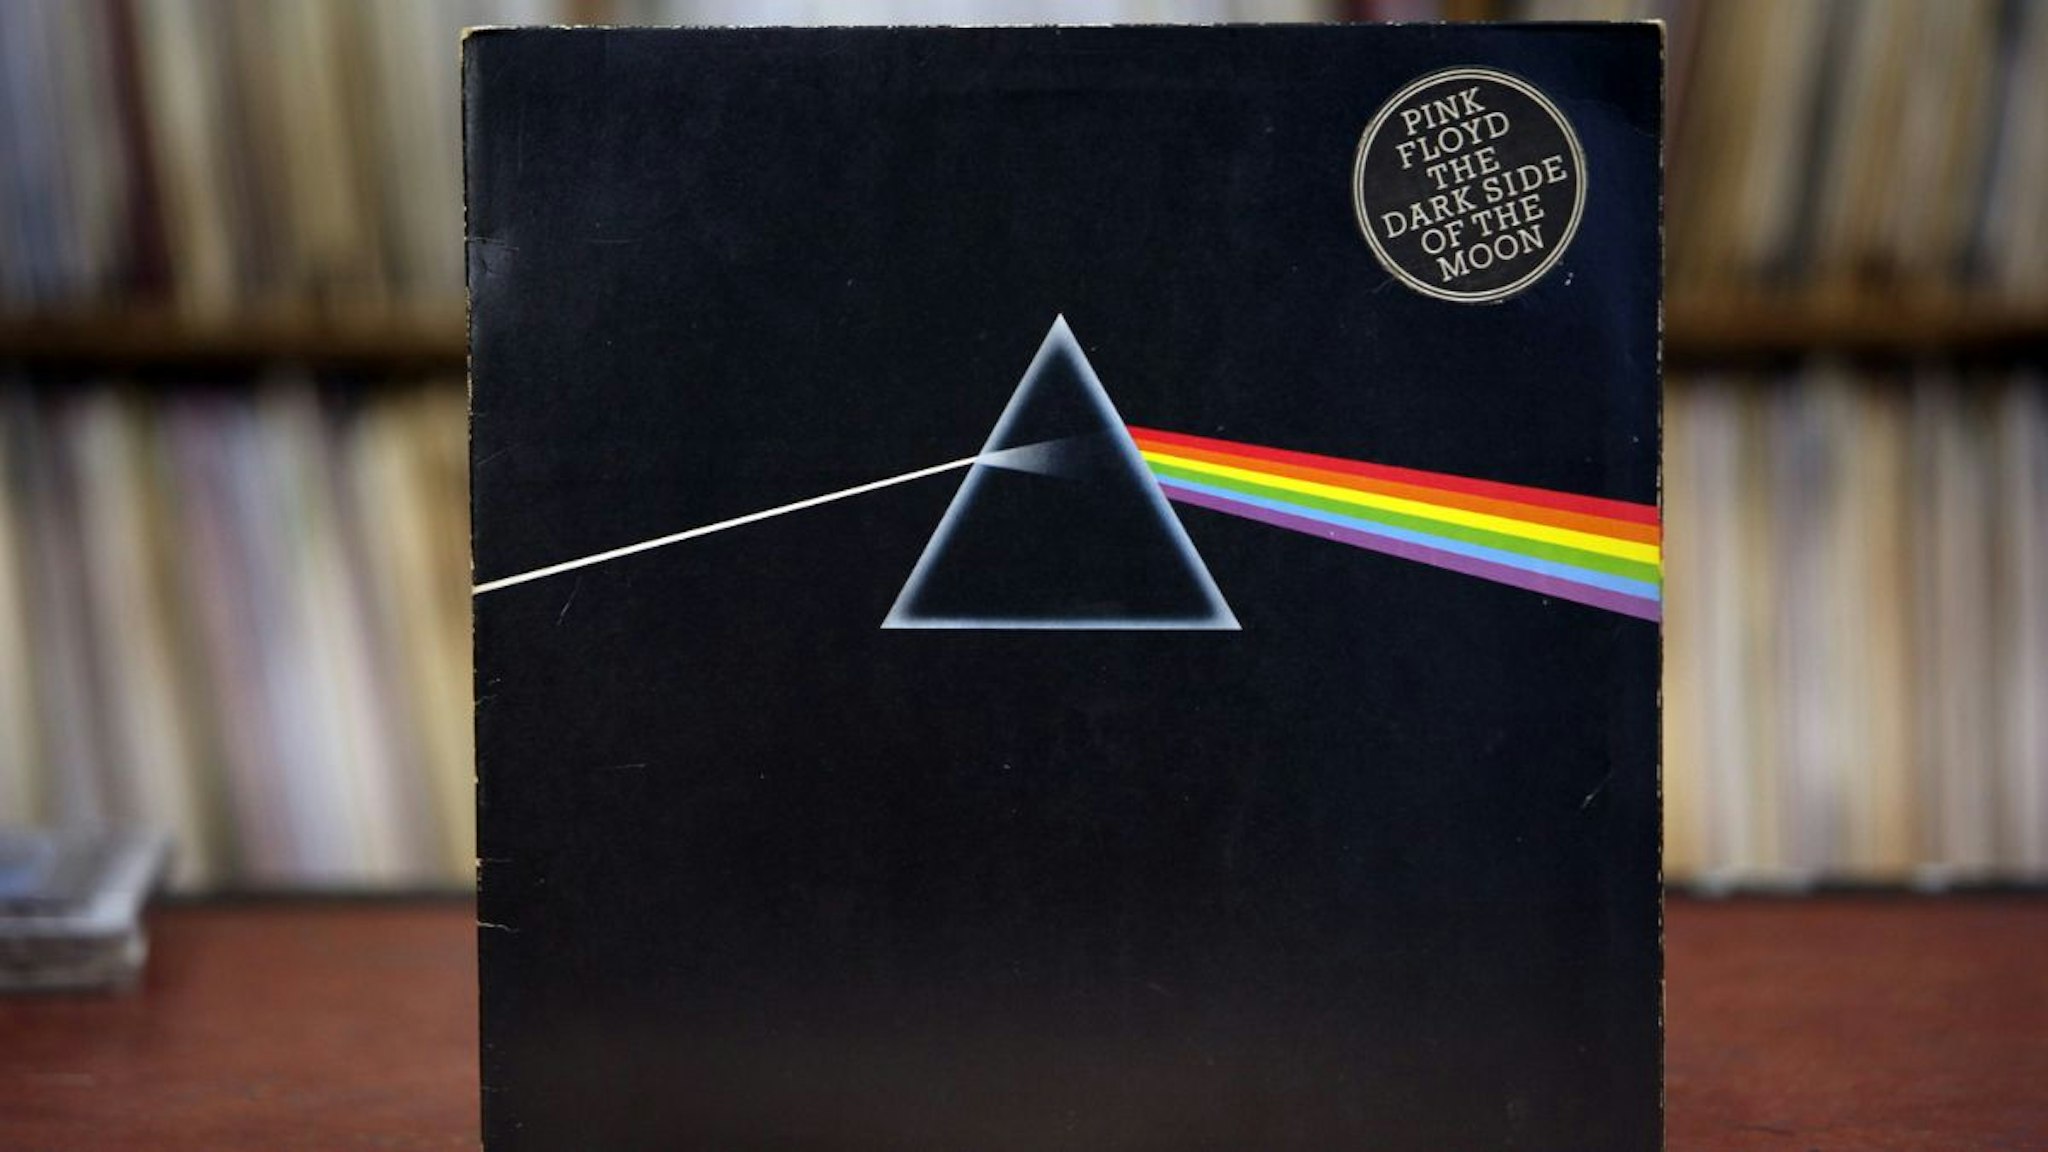 A vinyl LP for "Dark Side of the Moon" by Pink Floyd, a band signed to the EMI music label, sits on display at a record store in London, U.K., on Wednesday, Feb. 2, 2011.